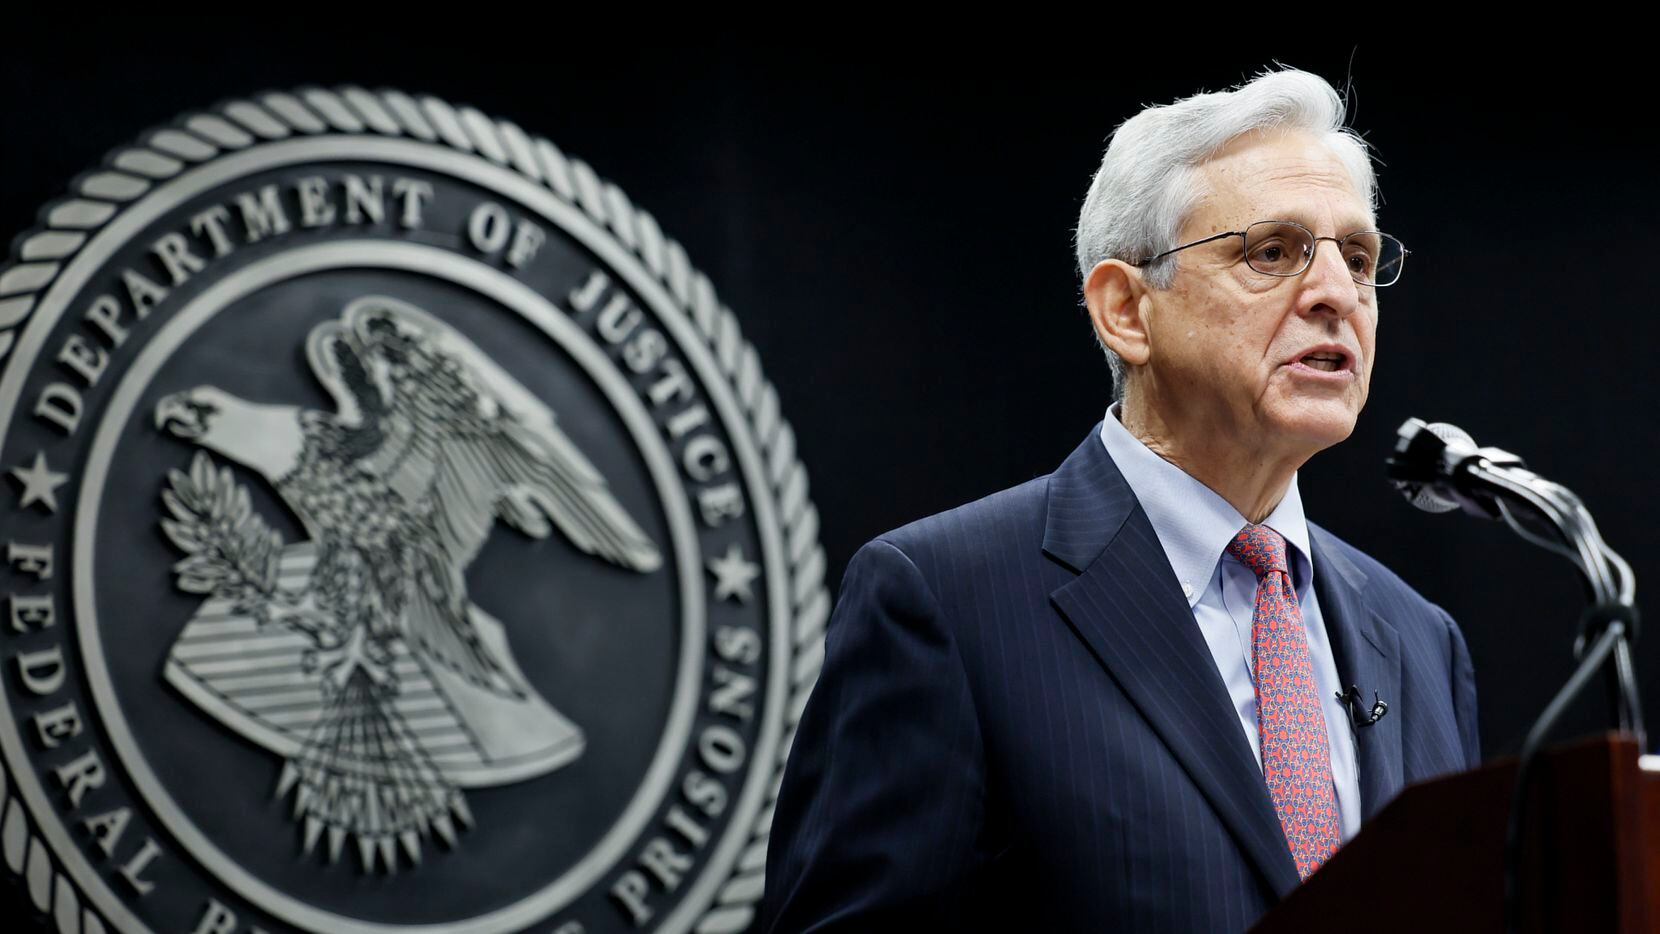 Attorney General Merrick Garland speaks during an event to swear in the new director of the...